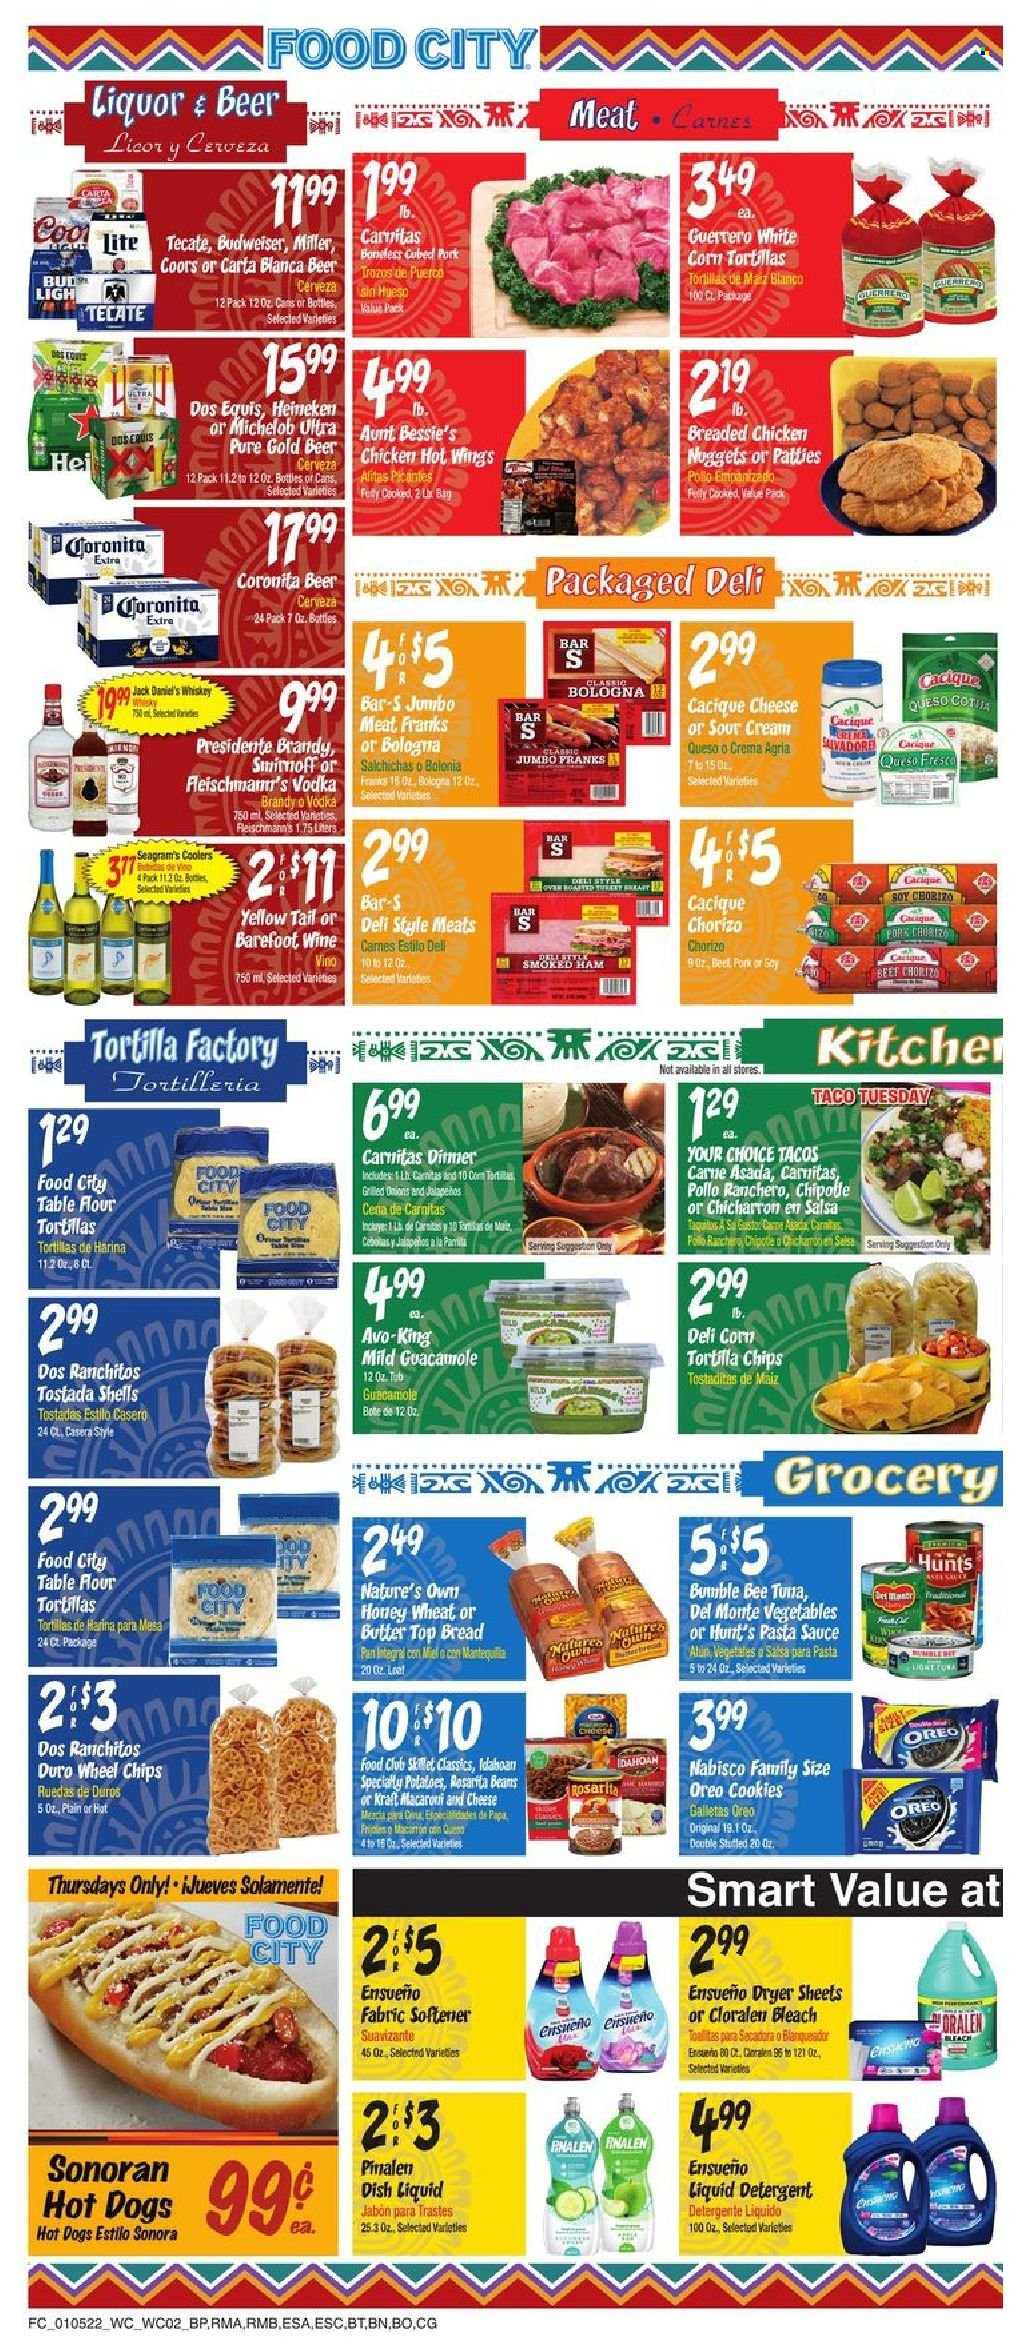 thumbnail - Food City Flyer - 01/05/2022 - 01/11/2022 - Sales products - bread, corn tortillas, tostadas, tacos, flour tortillas, Aunt Bessie's, beans, onion, macaroni & cheese, hot dog, Jack Daniel's, pasta sauce, nuggets, Bumble Bee, sauce, chicken nuggets, Kraft®, ham, chorizo, bologna sausage, guacamole, Oreo, butter, sour cream, cookies, tortilla chips, chips, salsa, brandy, vodka, whiskey, liquor, whisky, beer, Heineken, Miller, Nature's Own, Budweiser, Coors, Dos Equis, Michelob. Page 2.